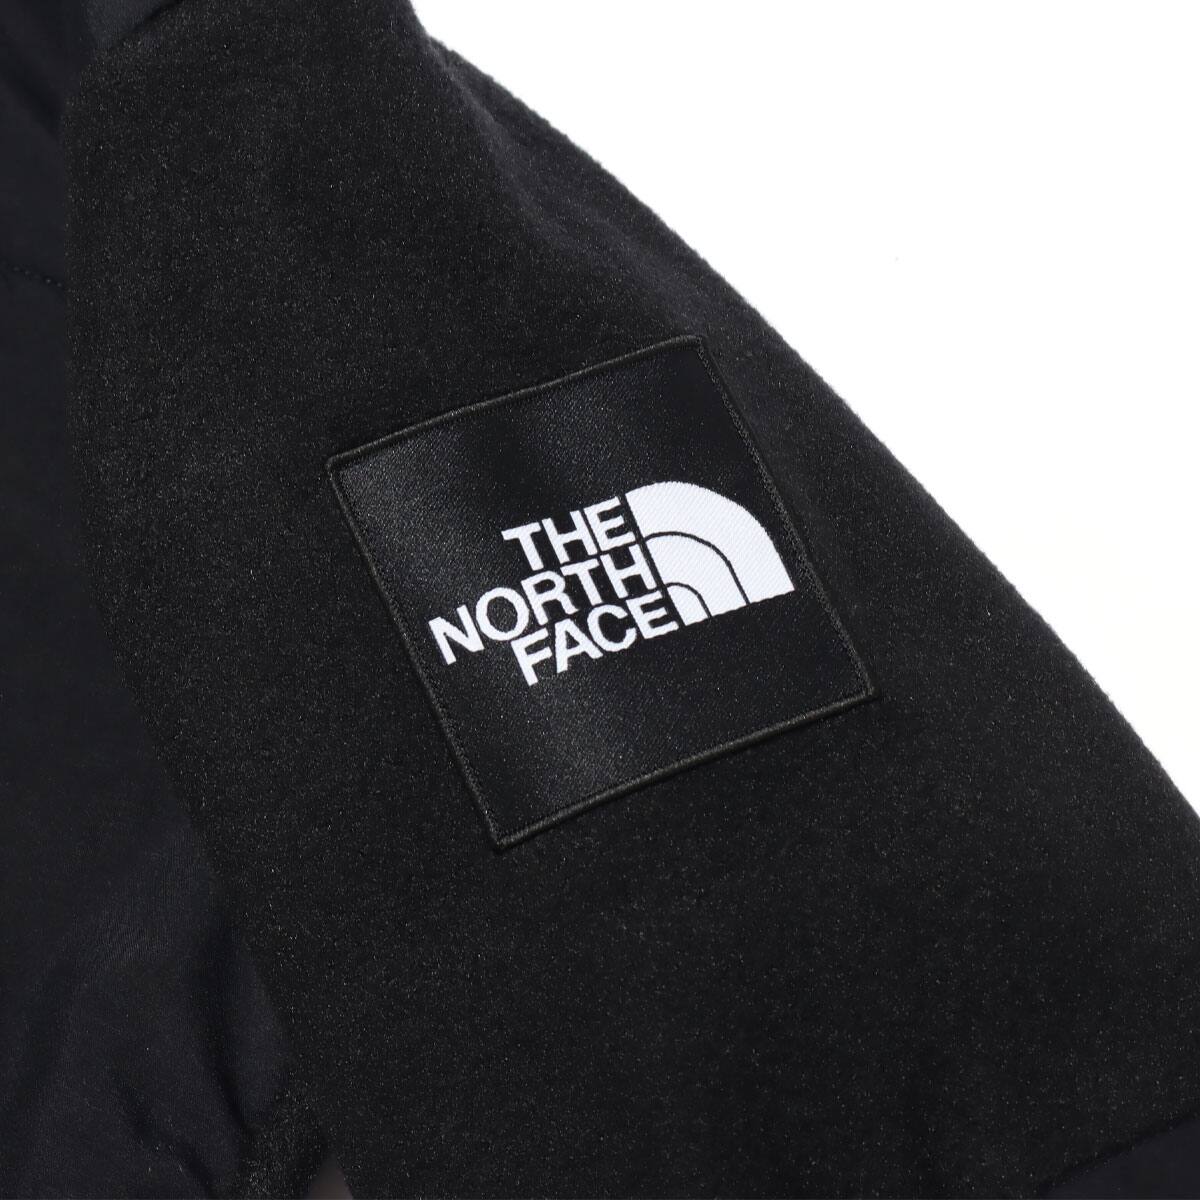 THE NORTH FACE DENALI HOODIE BLACK FW I